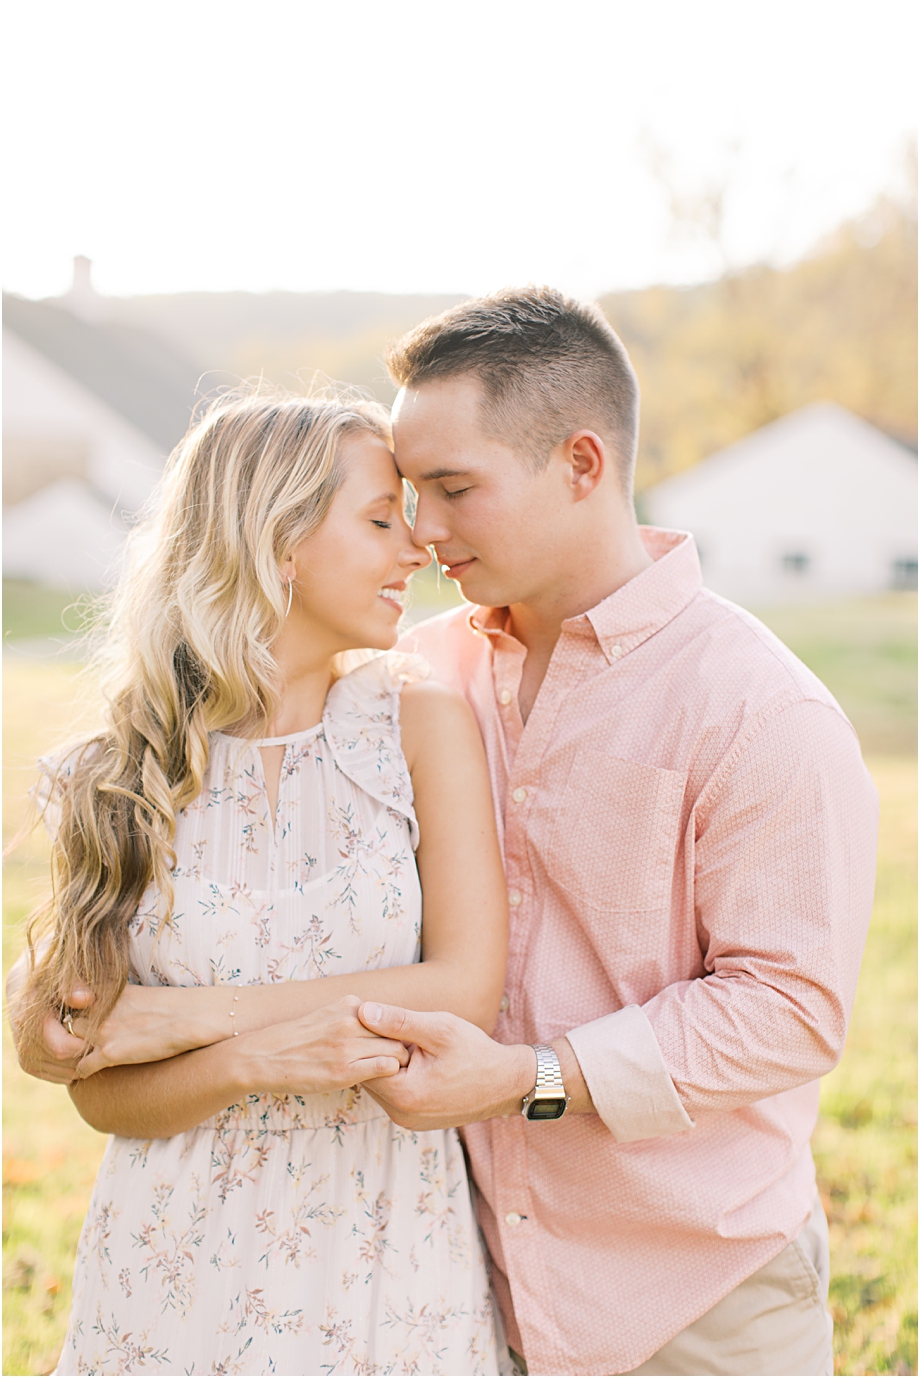 golden hour engagement session at valley forge | sarah canning photography